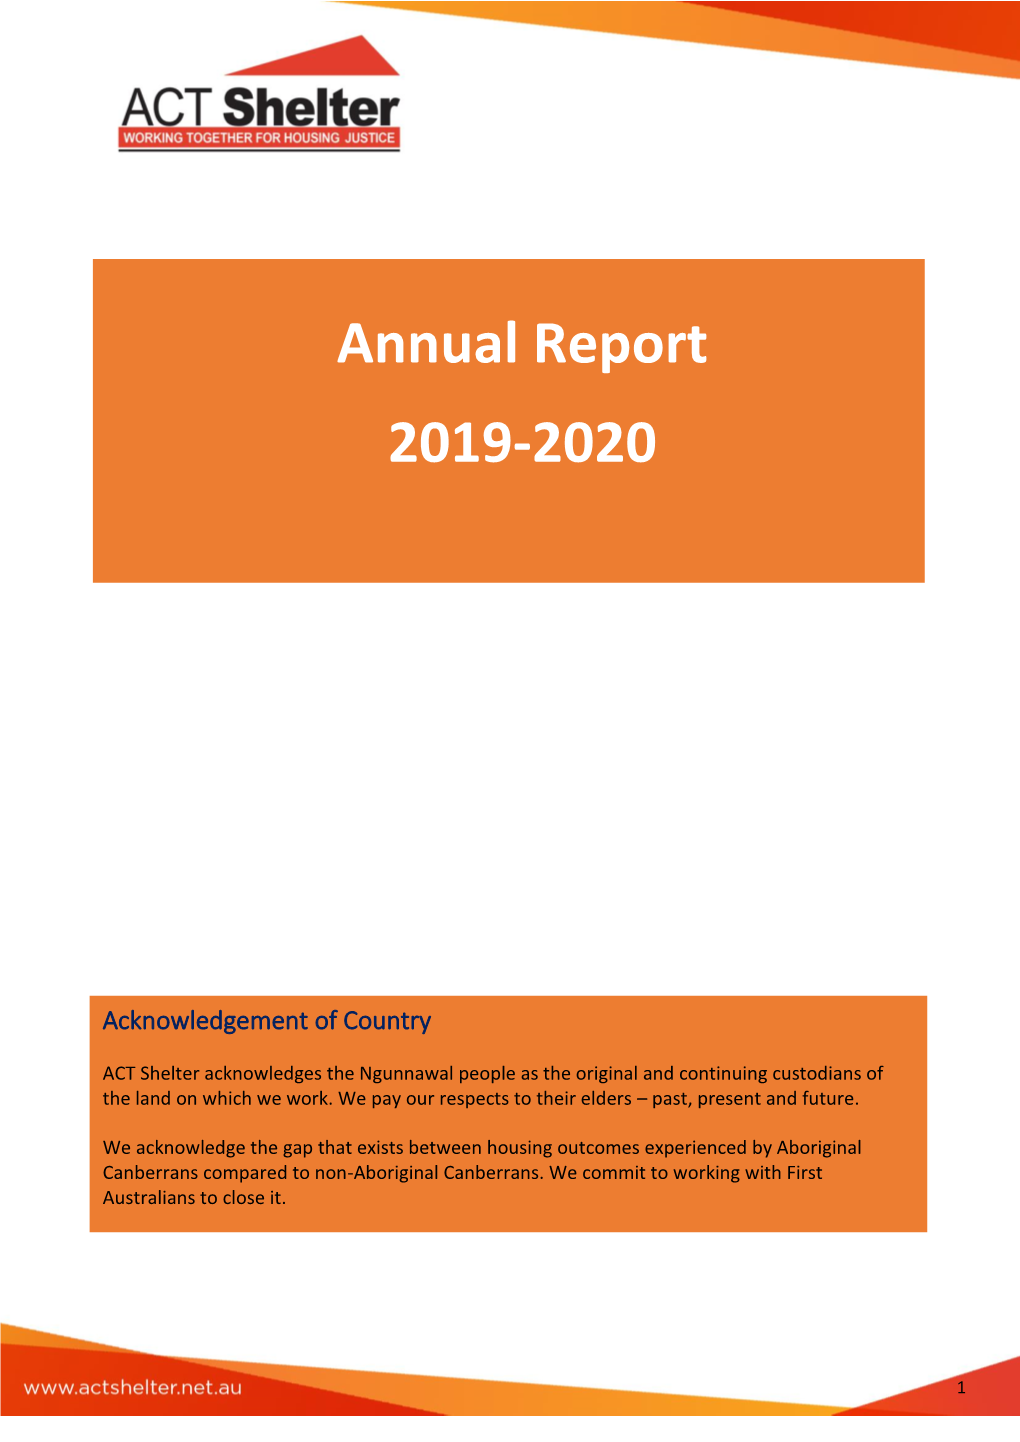 ACT Shelter Annual Report 2019-2020